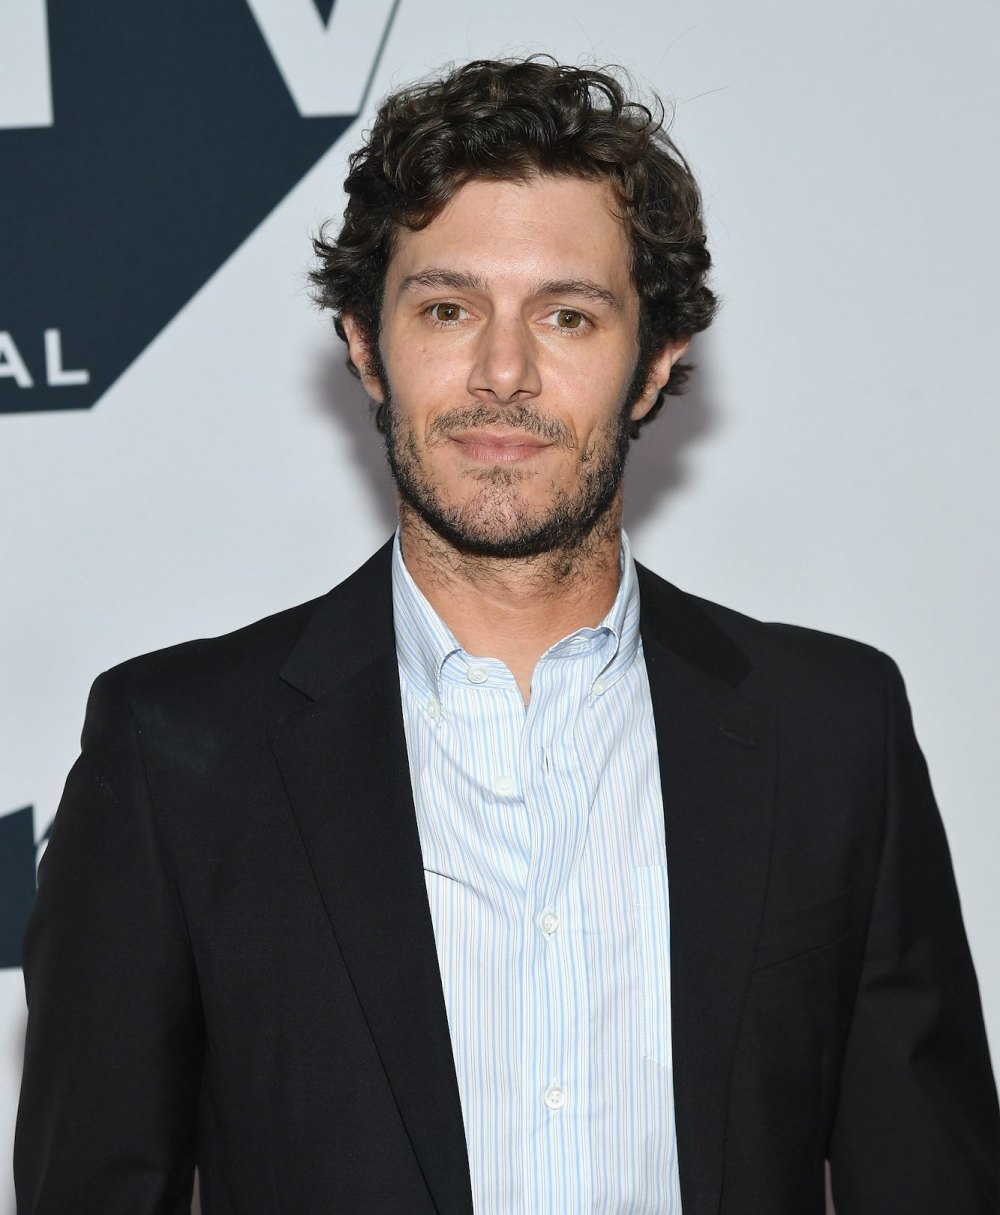 Rachel Bilson Says Olsen Twins Rescued Her From Mob of Adam Brody Fans